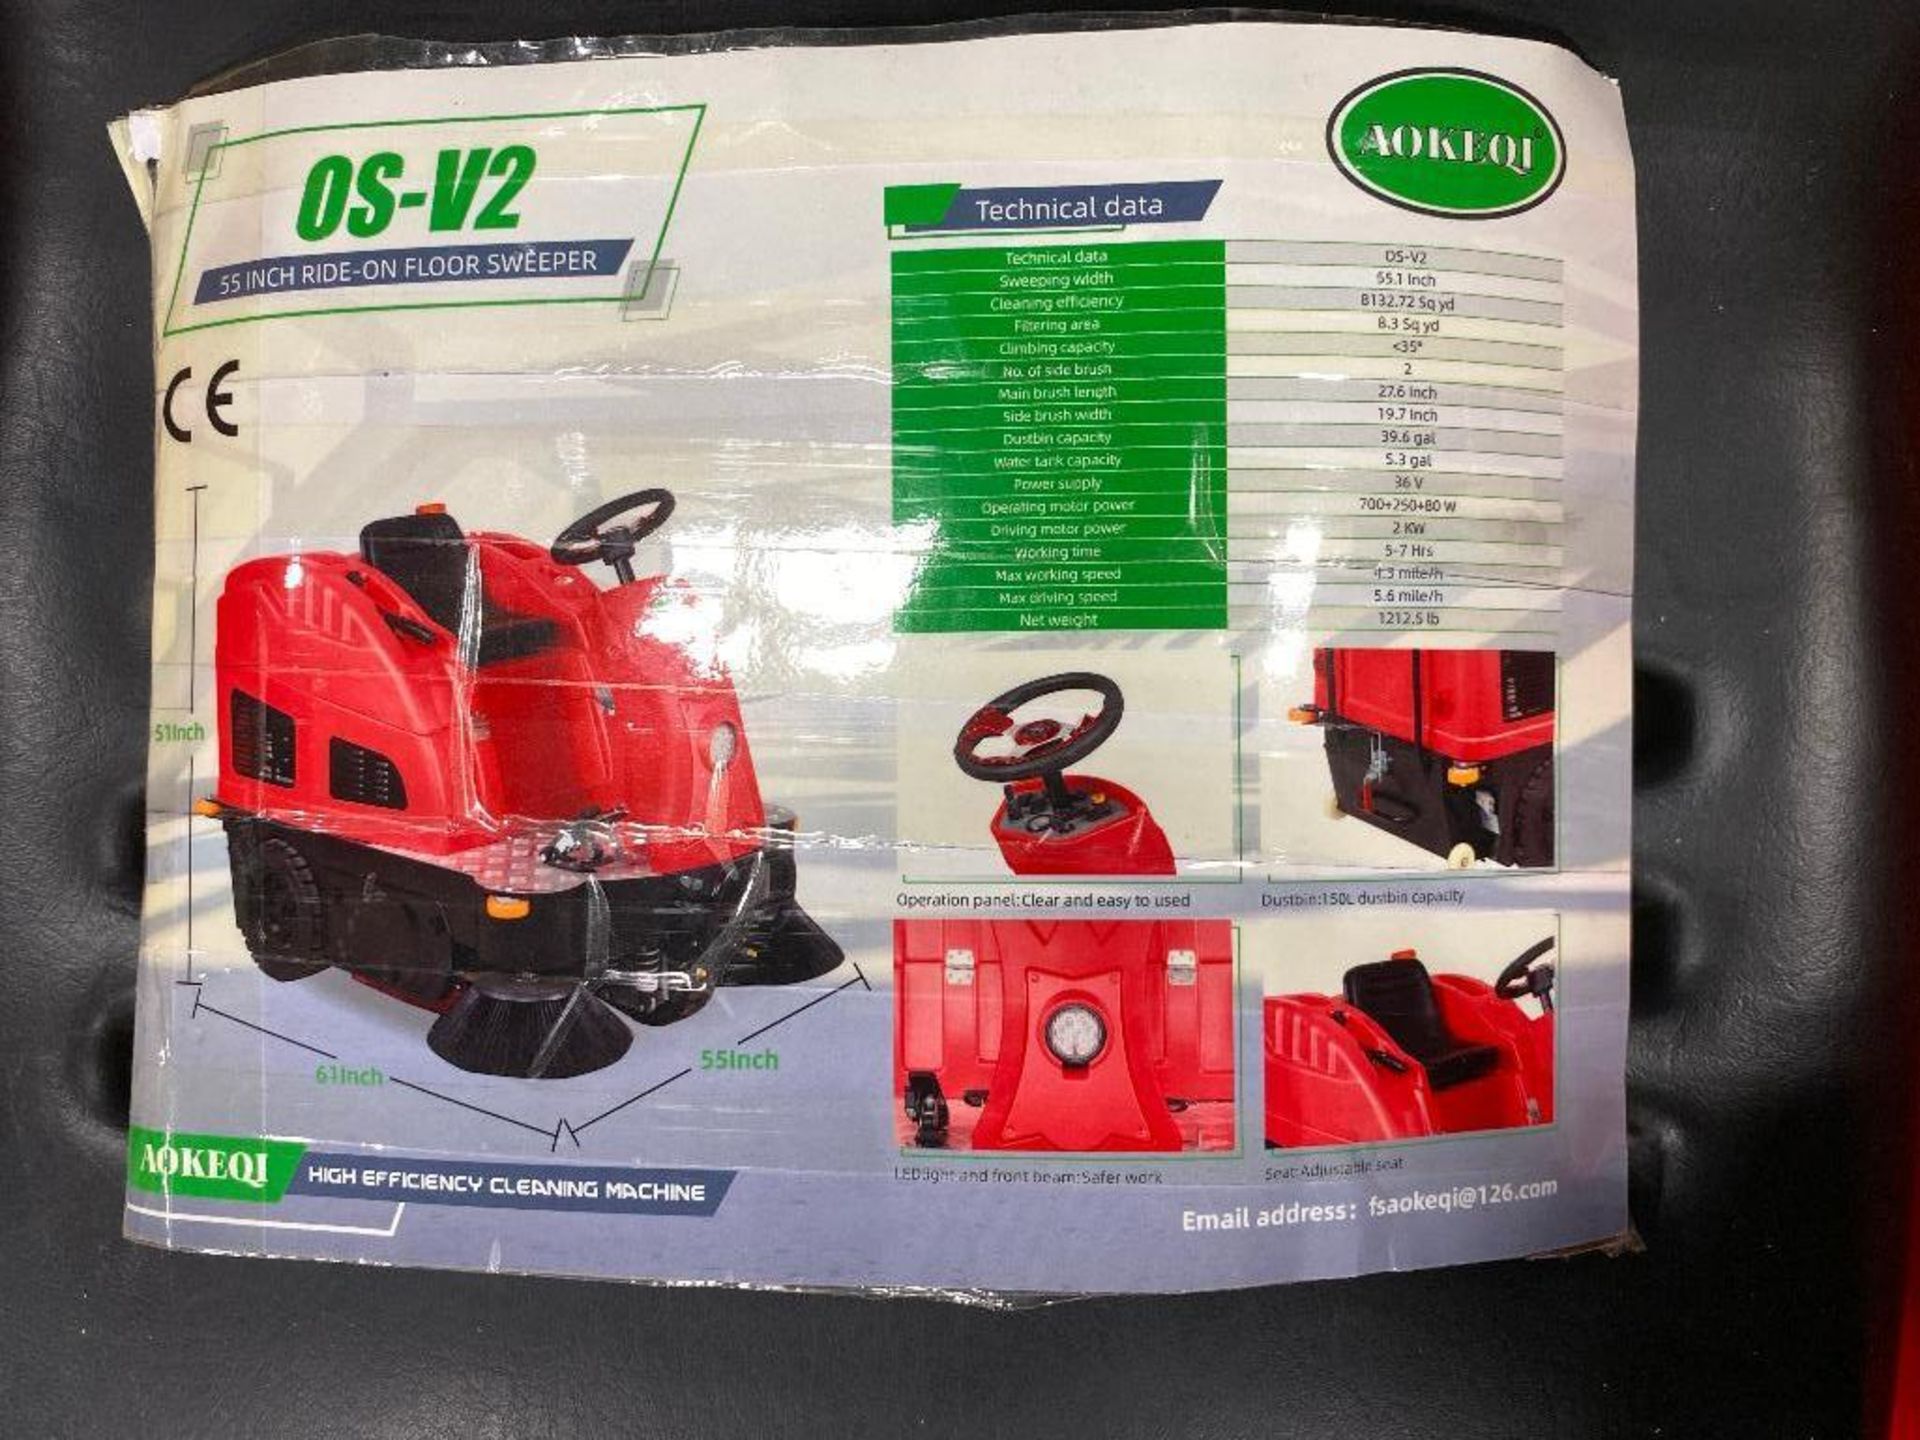 New 2022 Aokeqi 0S-V2 55" Wide Ride-On Electric Industrial Floor Sweeper - Image 8 of 10